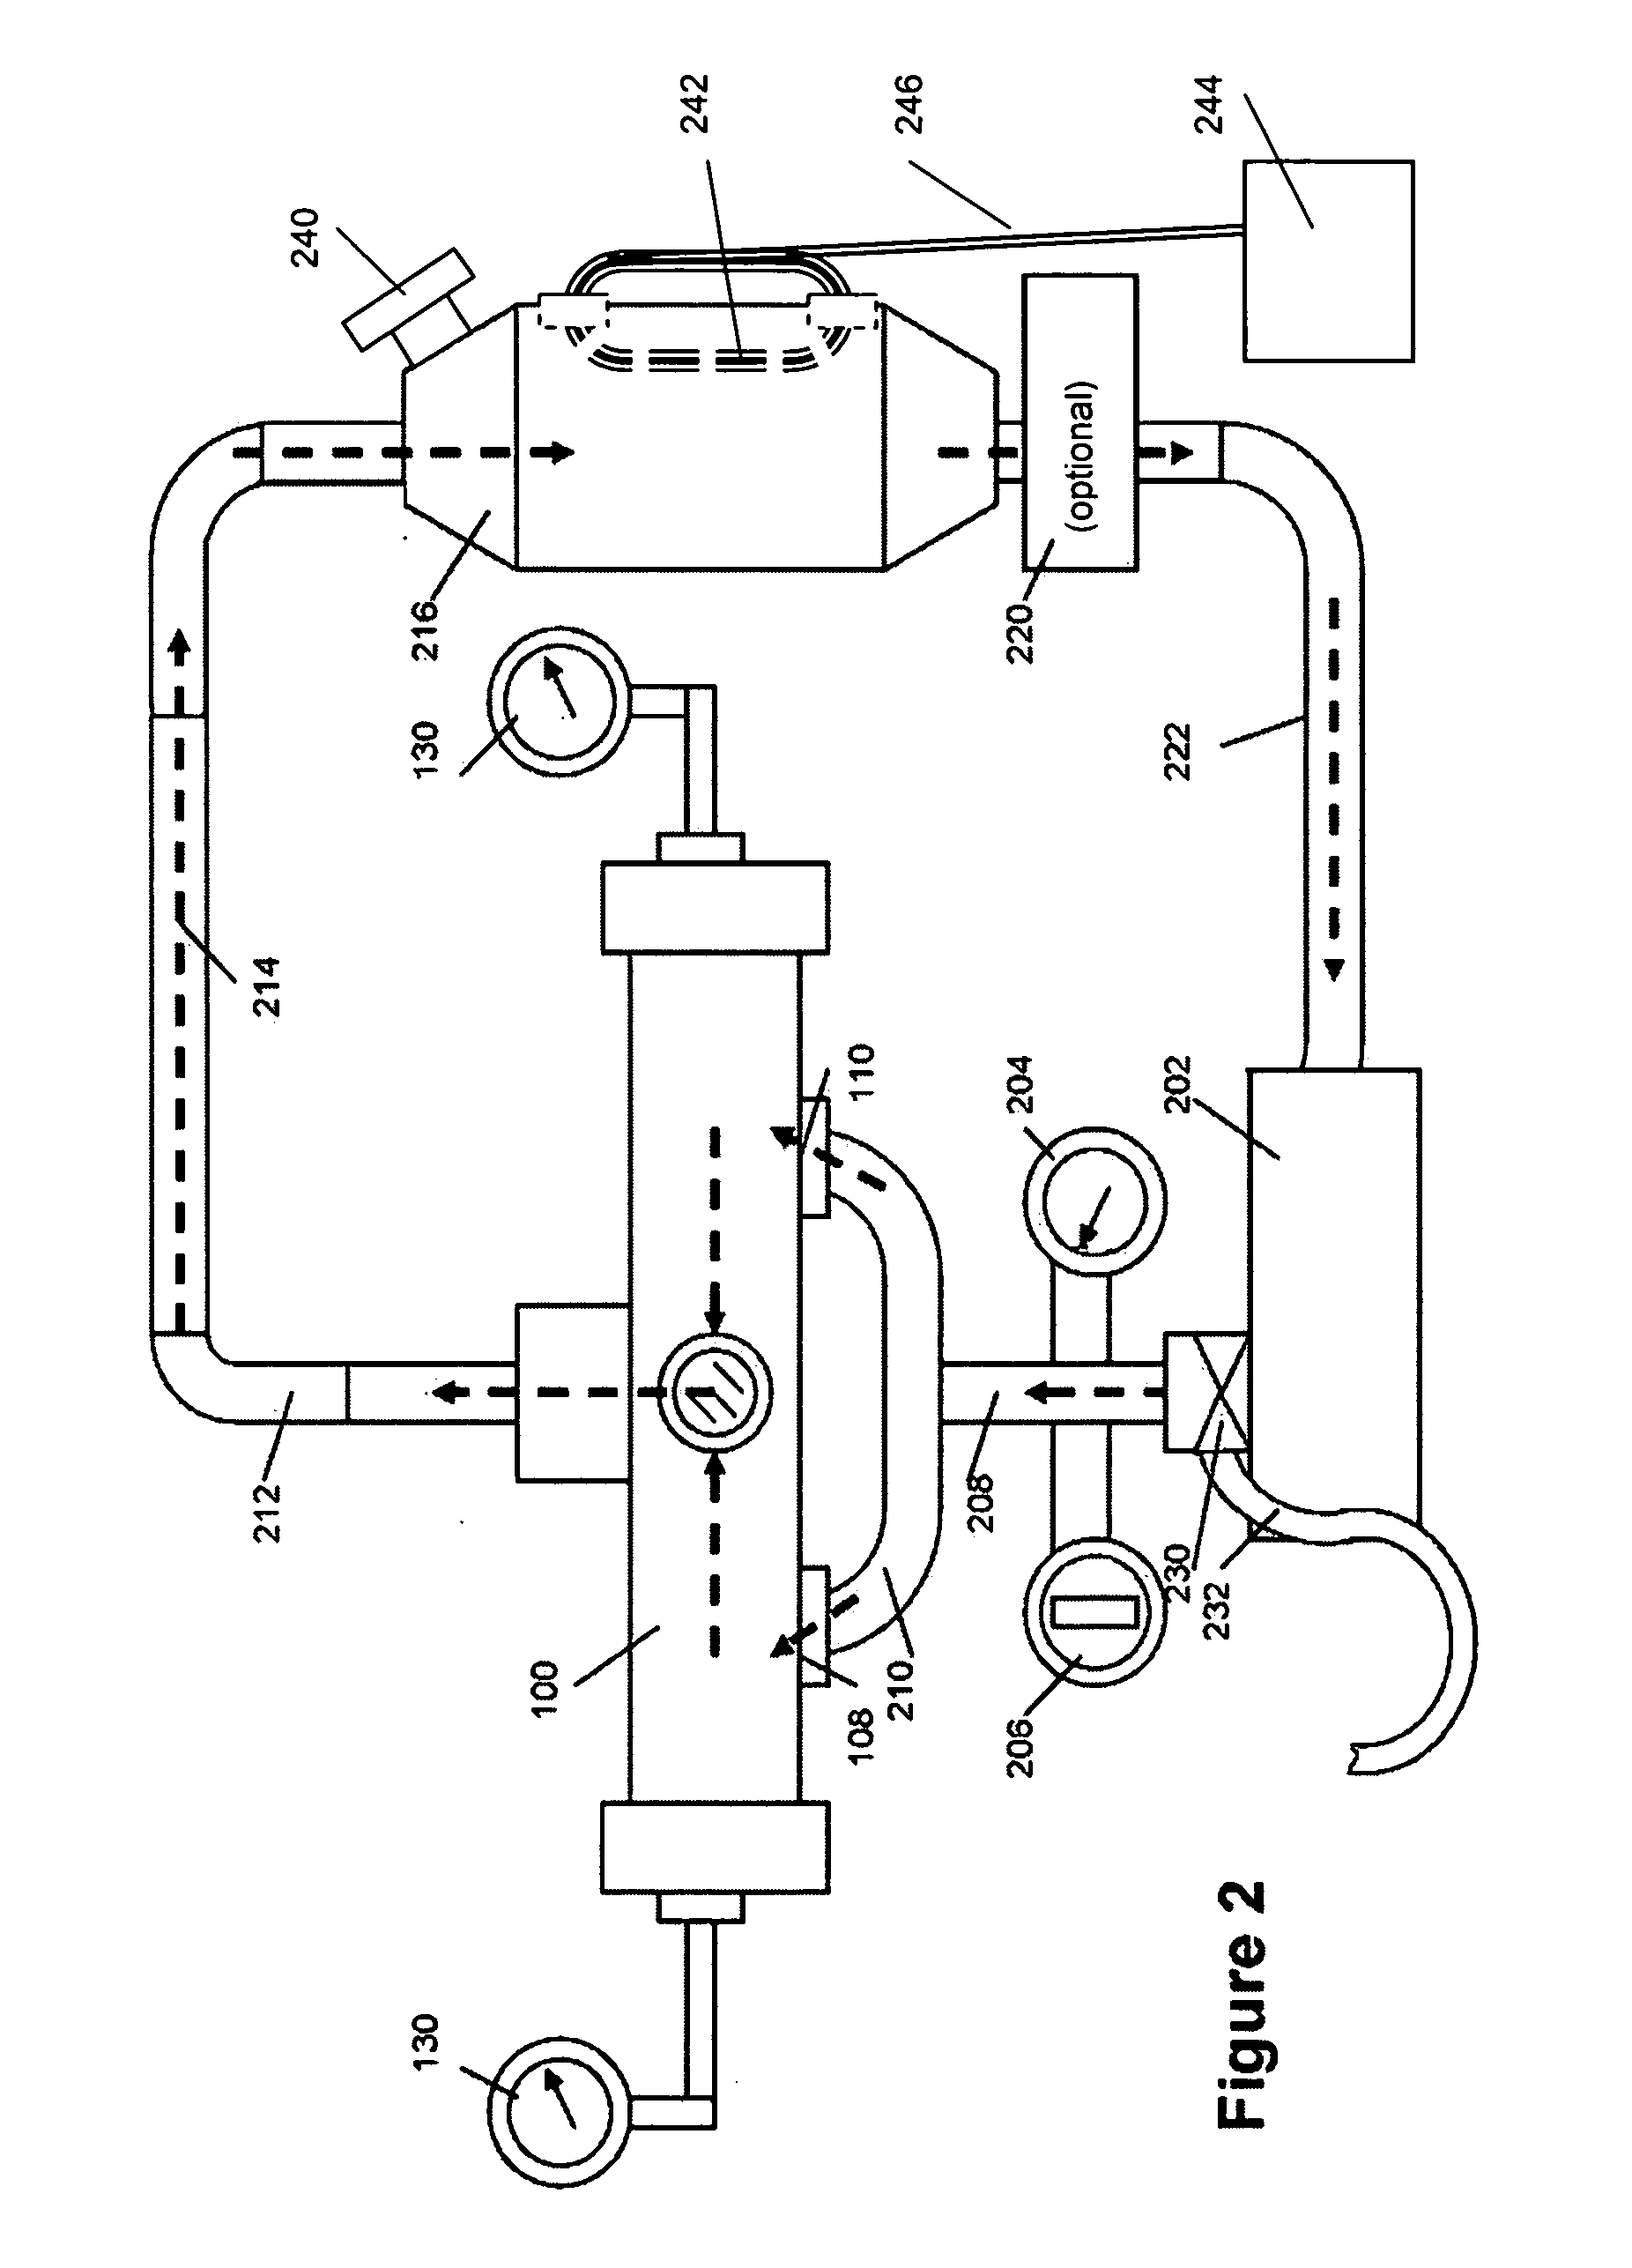 Device and method for mixing liquids and oils or particulate solids and mixtures generated therefrom